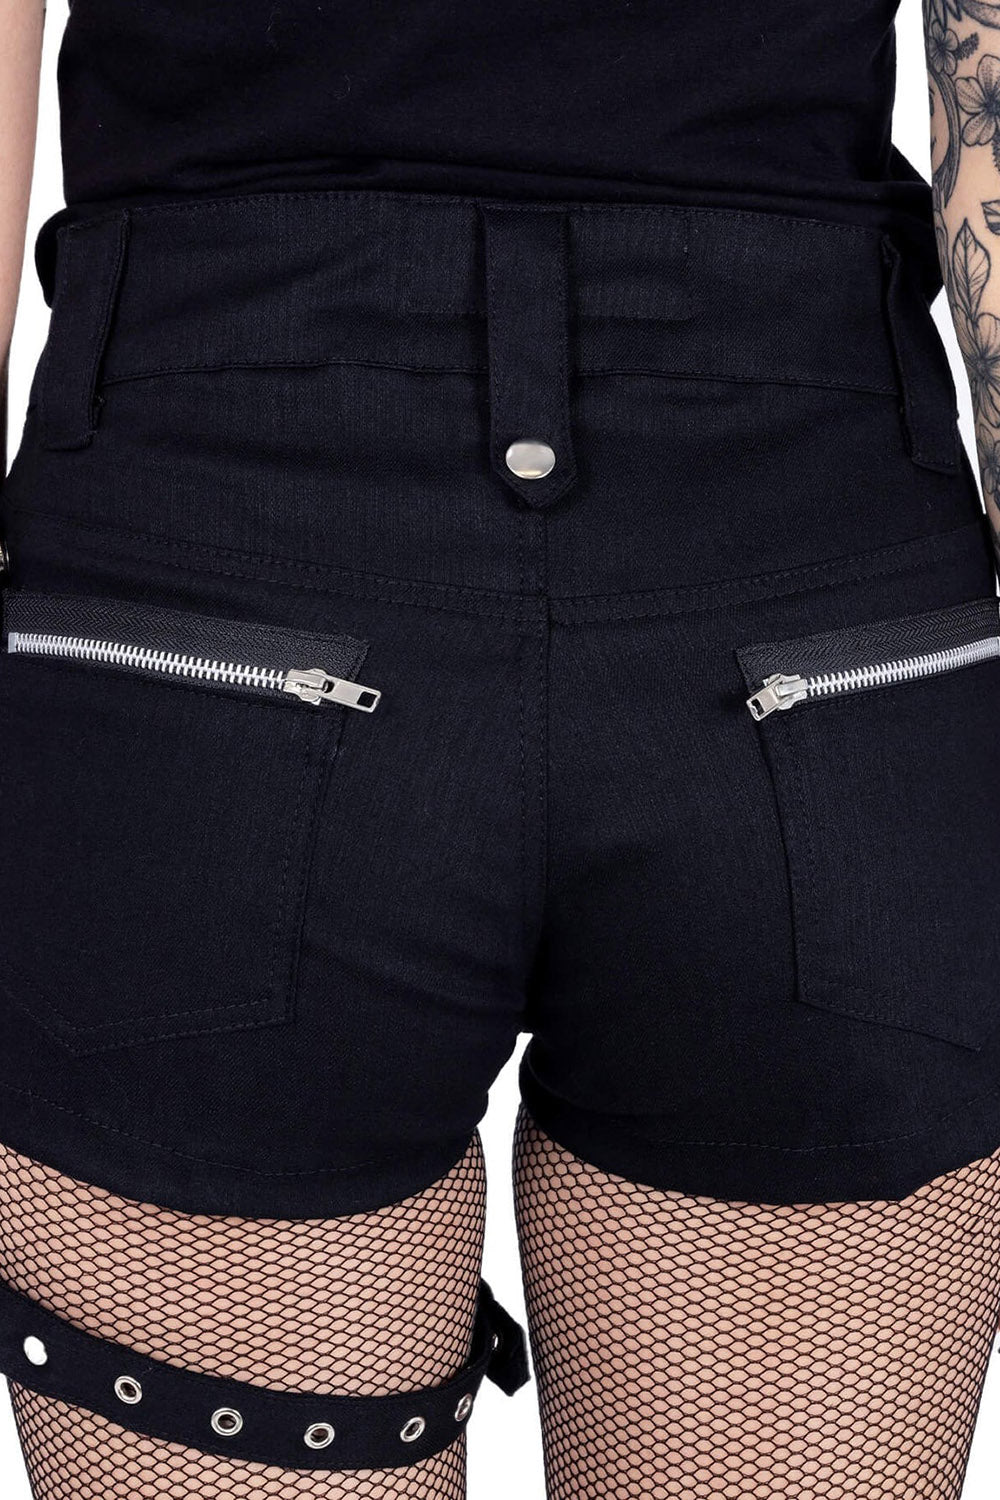 womens low waisted goth bootie shorts